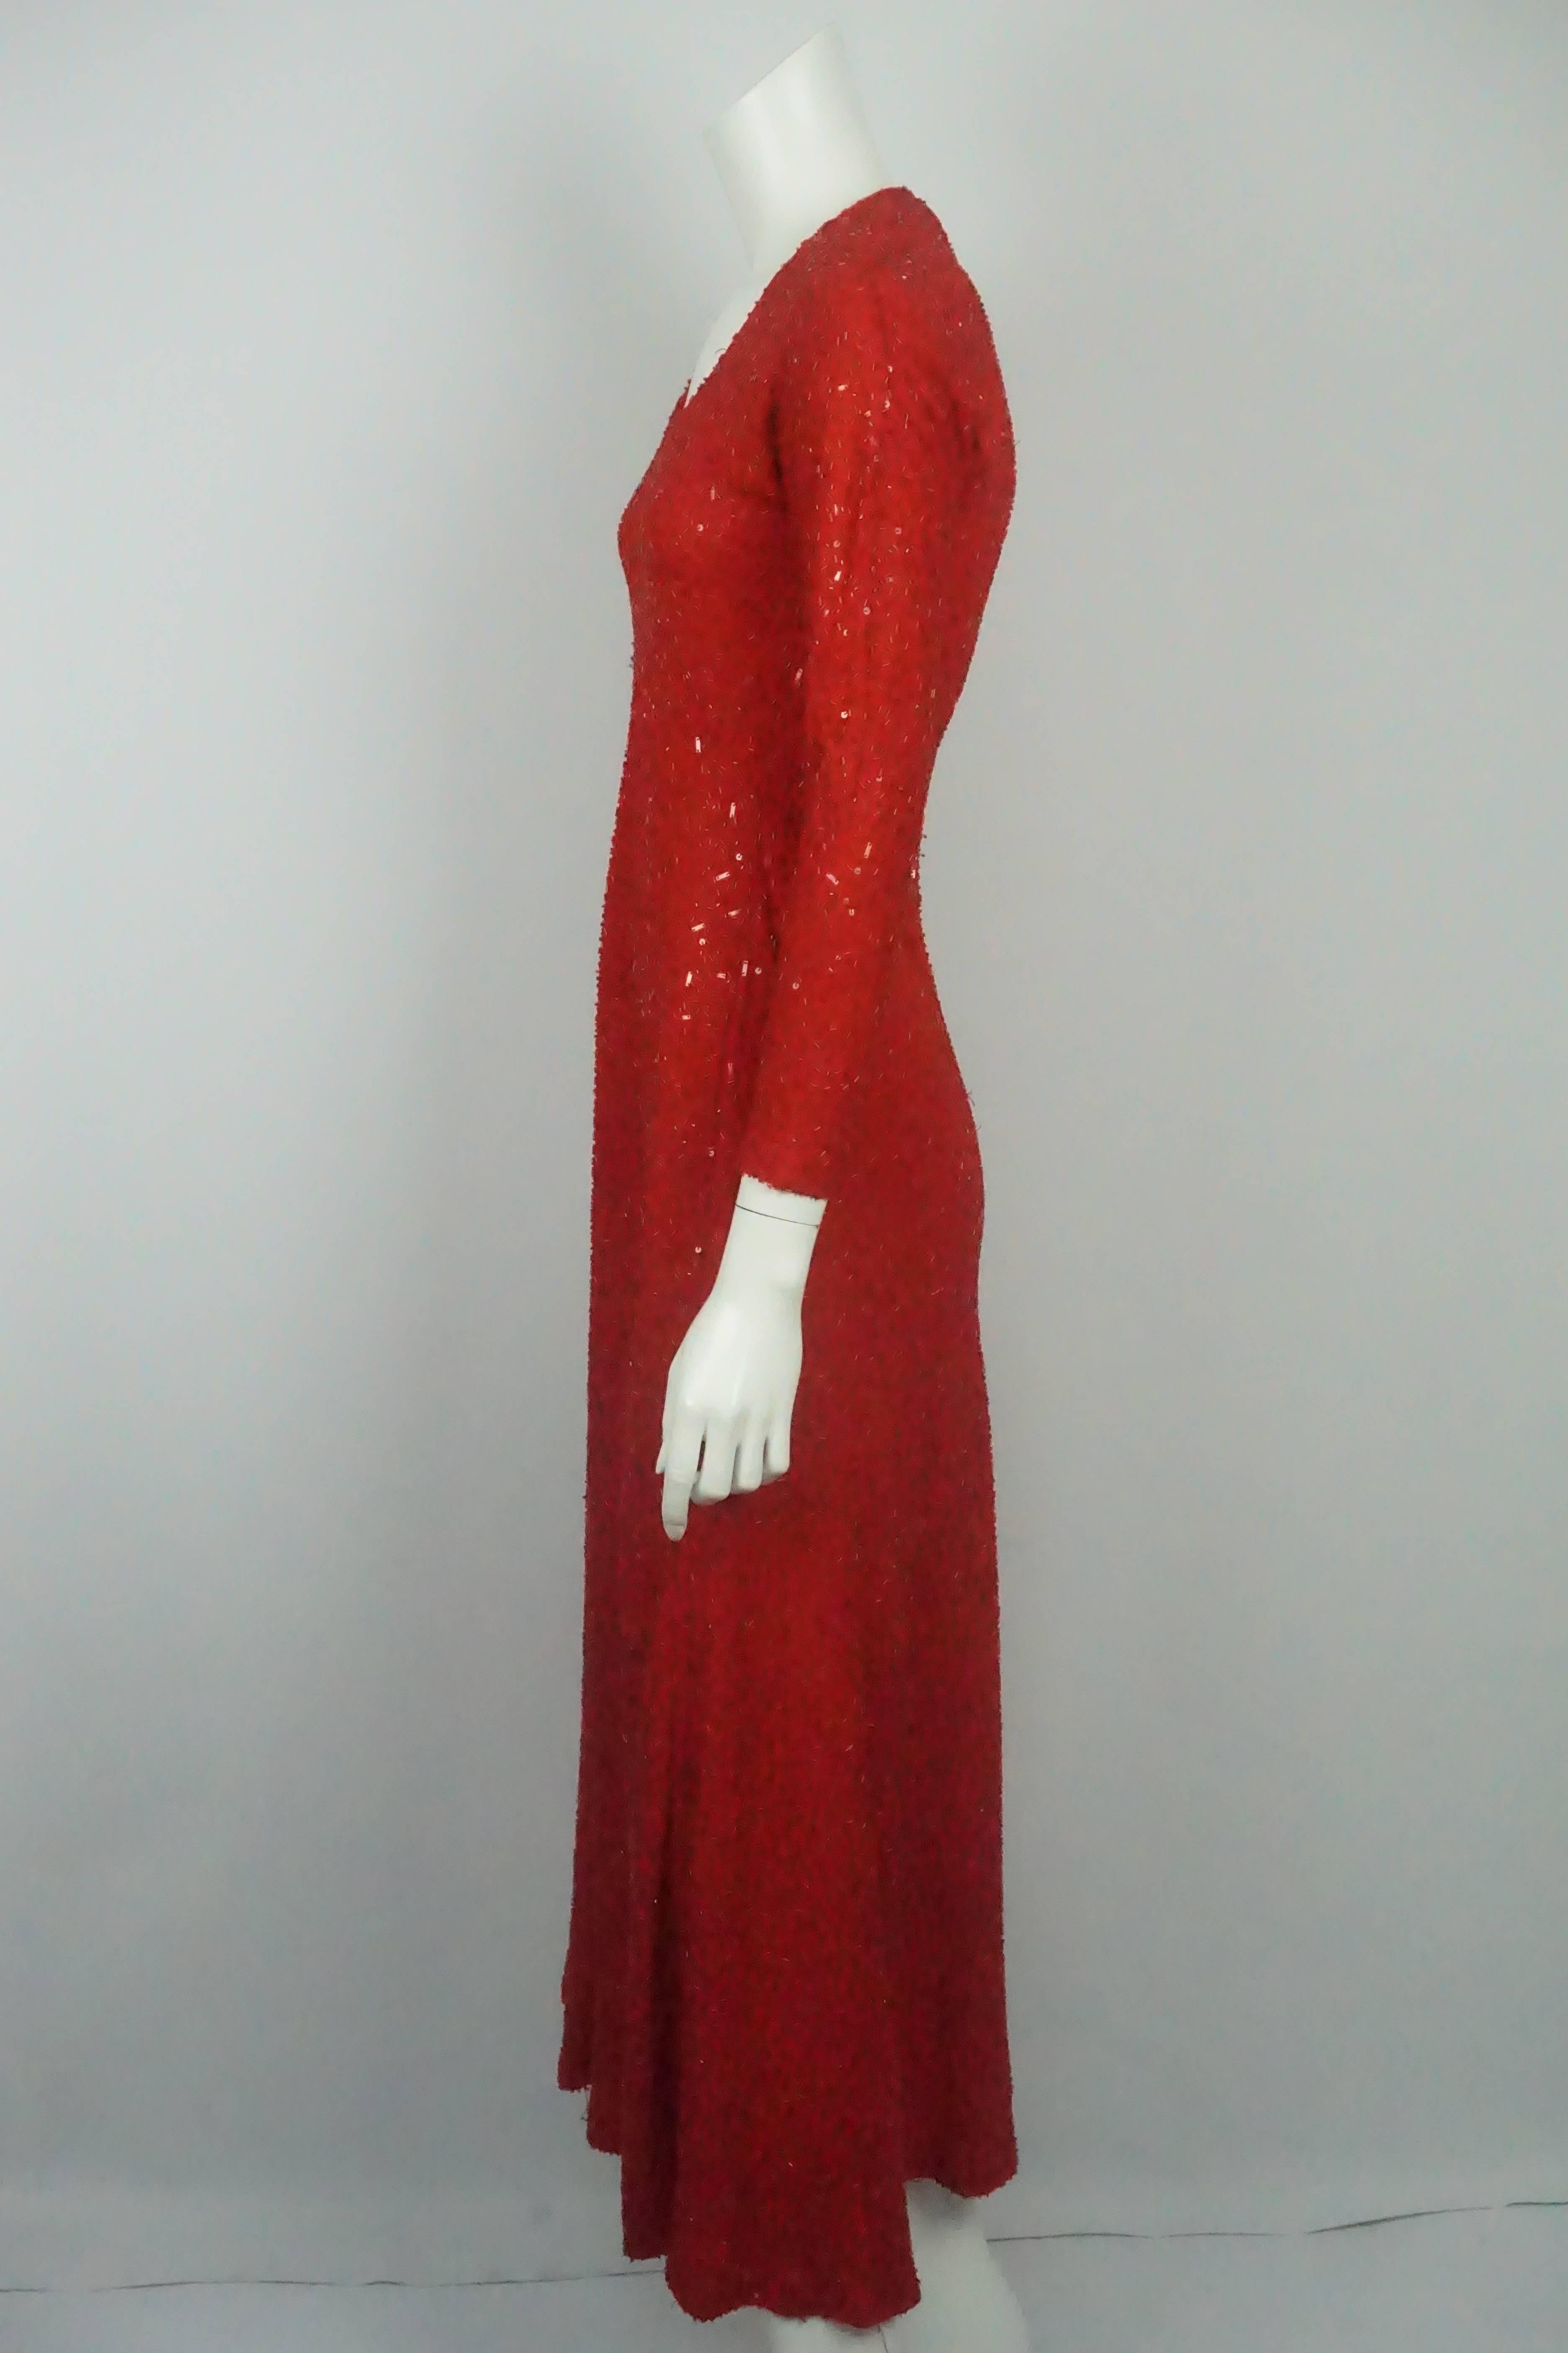 Naeem Khan Red Fully Beaded Long Sleeve Gown - Small  This jersey, fully beaded gown is in good condition with some areas with minor beads missing but the gown was taken in and has extra fabric with beads inside so it can be repaired wherever